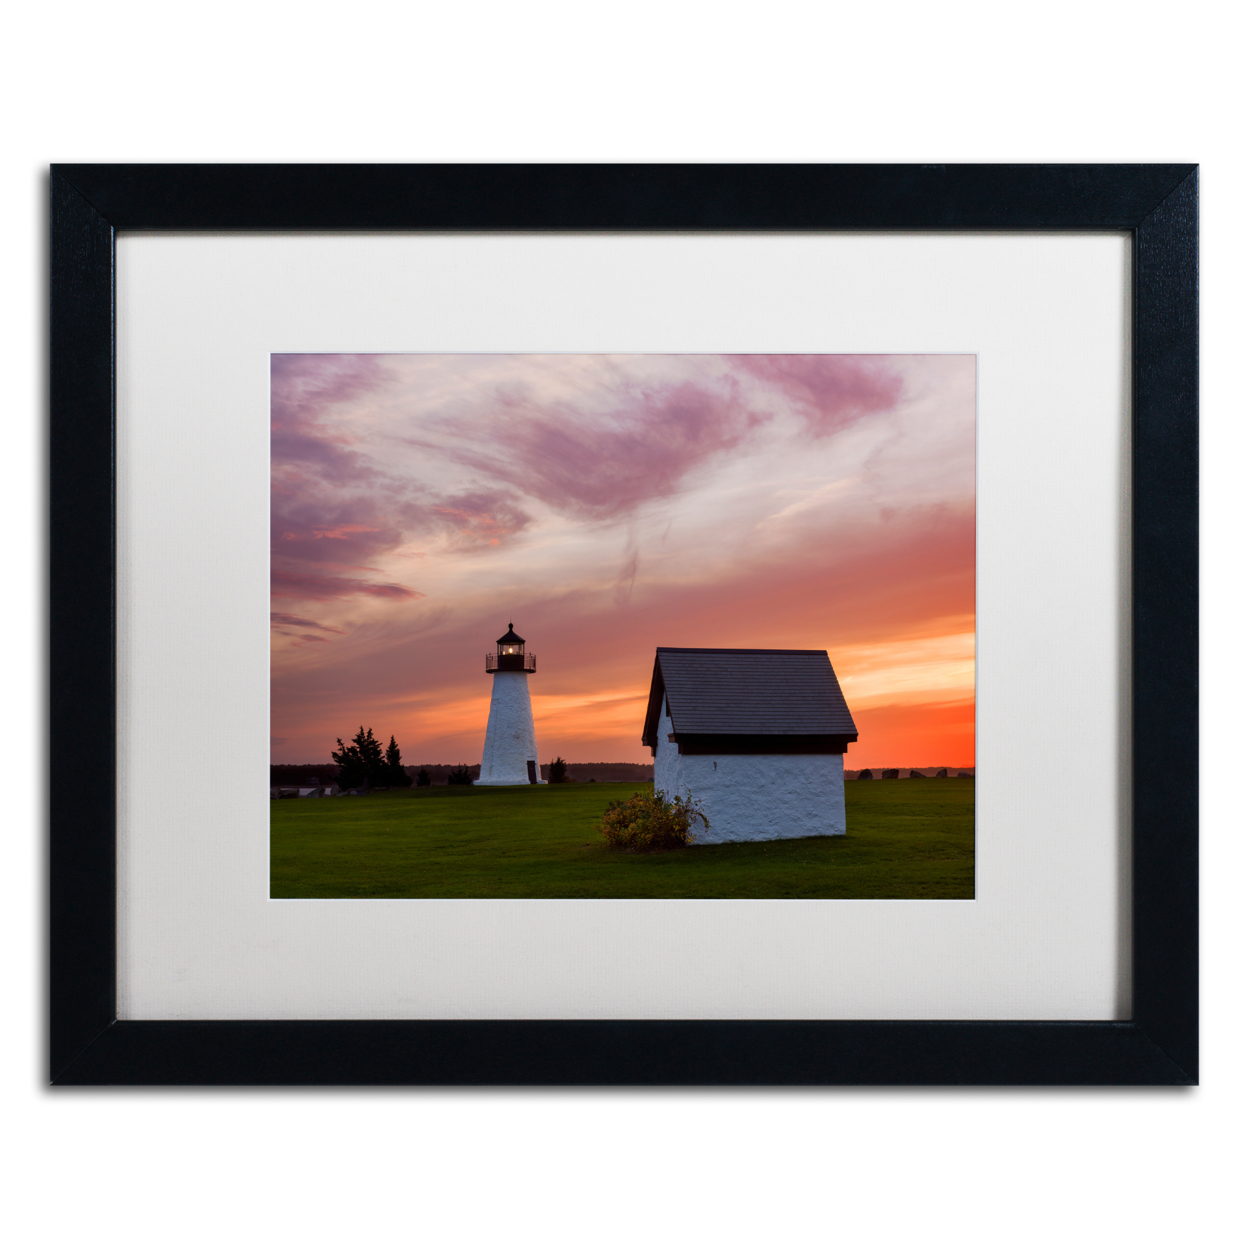 Michael Blanchette Photography 'Guidepost' Black Wooden Framed Art 18 X 22 Inches